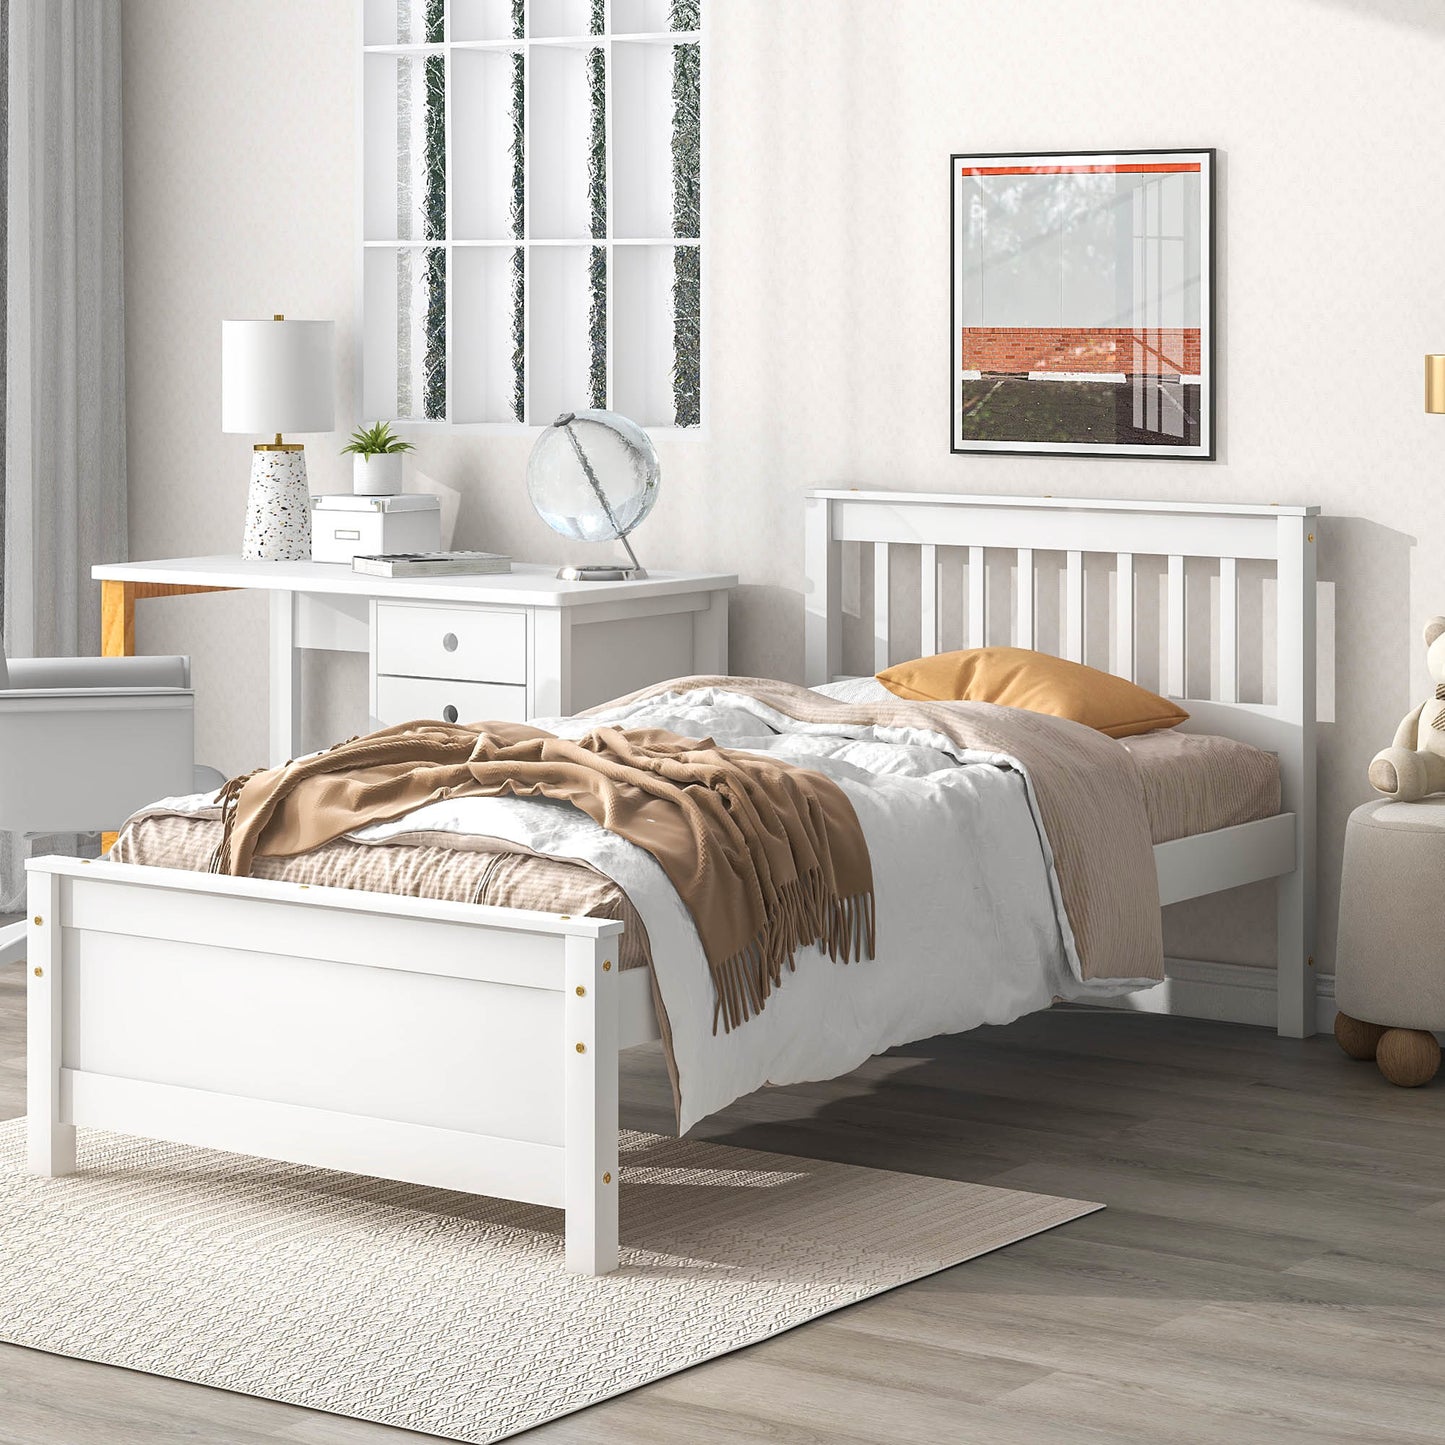 twin bed with headboard & nightstand, white